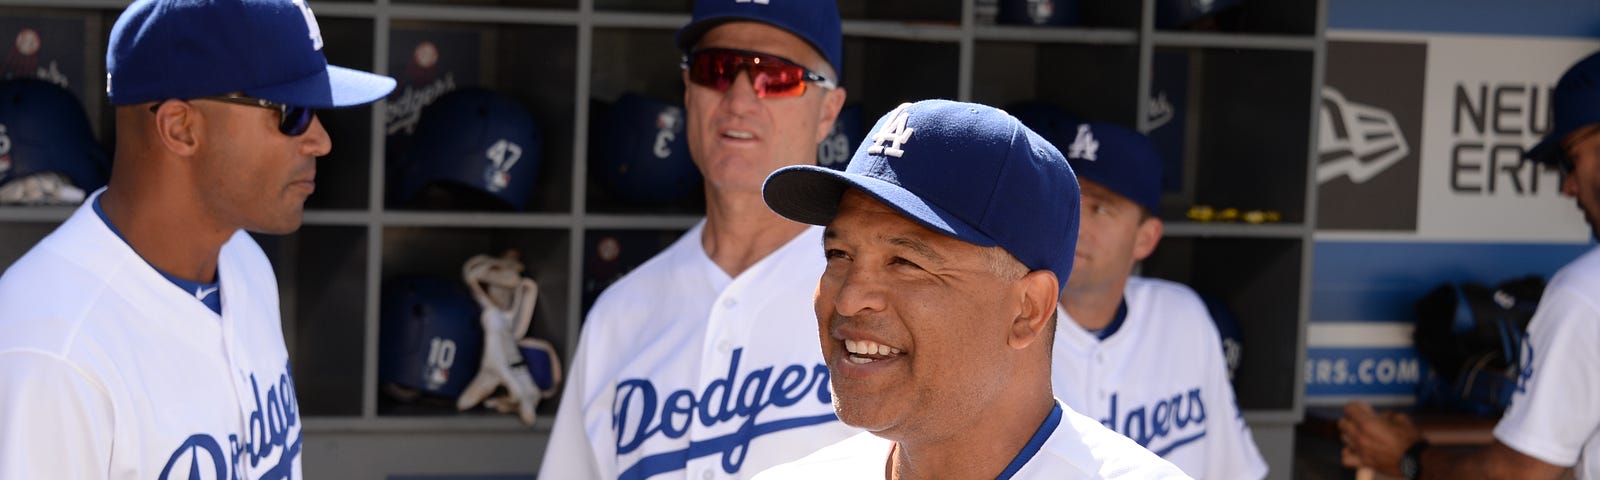 MOY bueno! Dave Roberts is NL Manager of the Year, by Jon Weisman